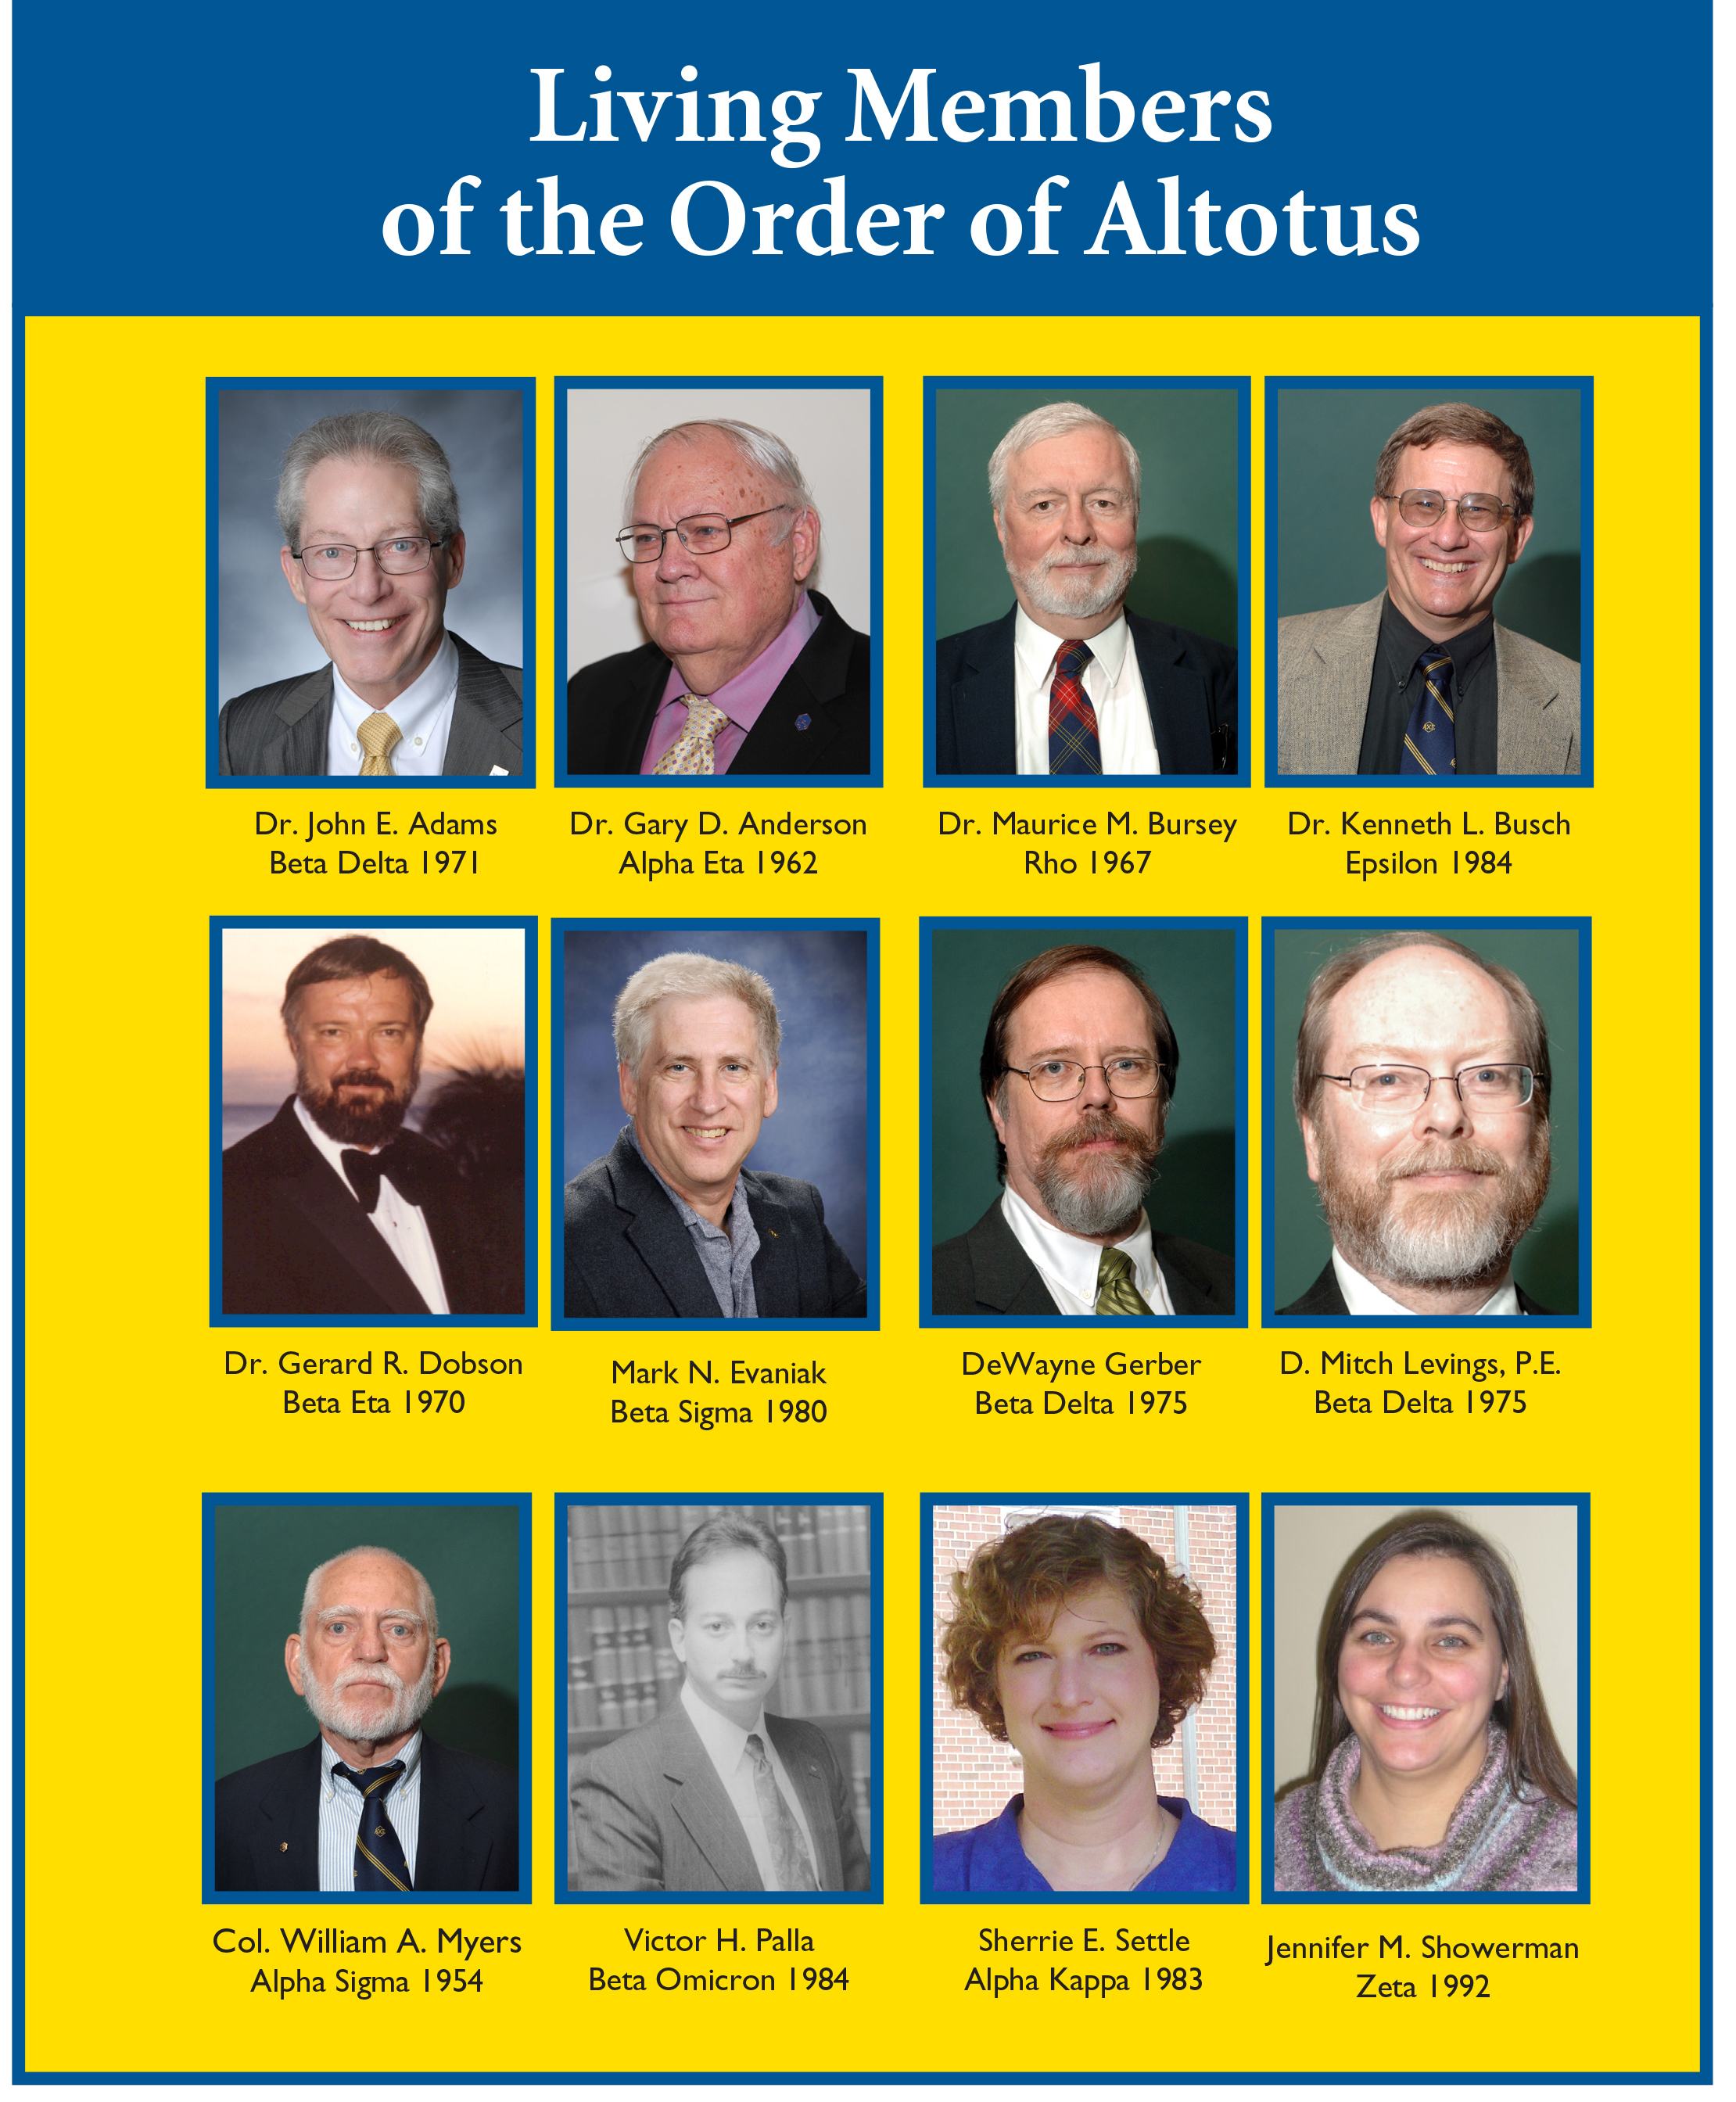 photos of living members of the Order of Altotus